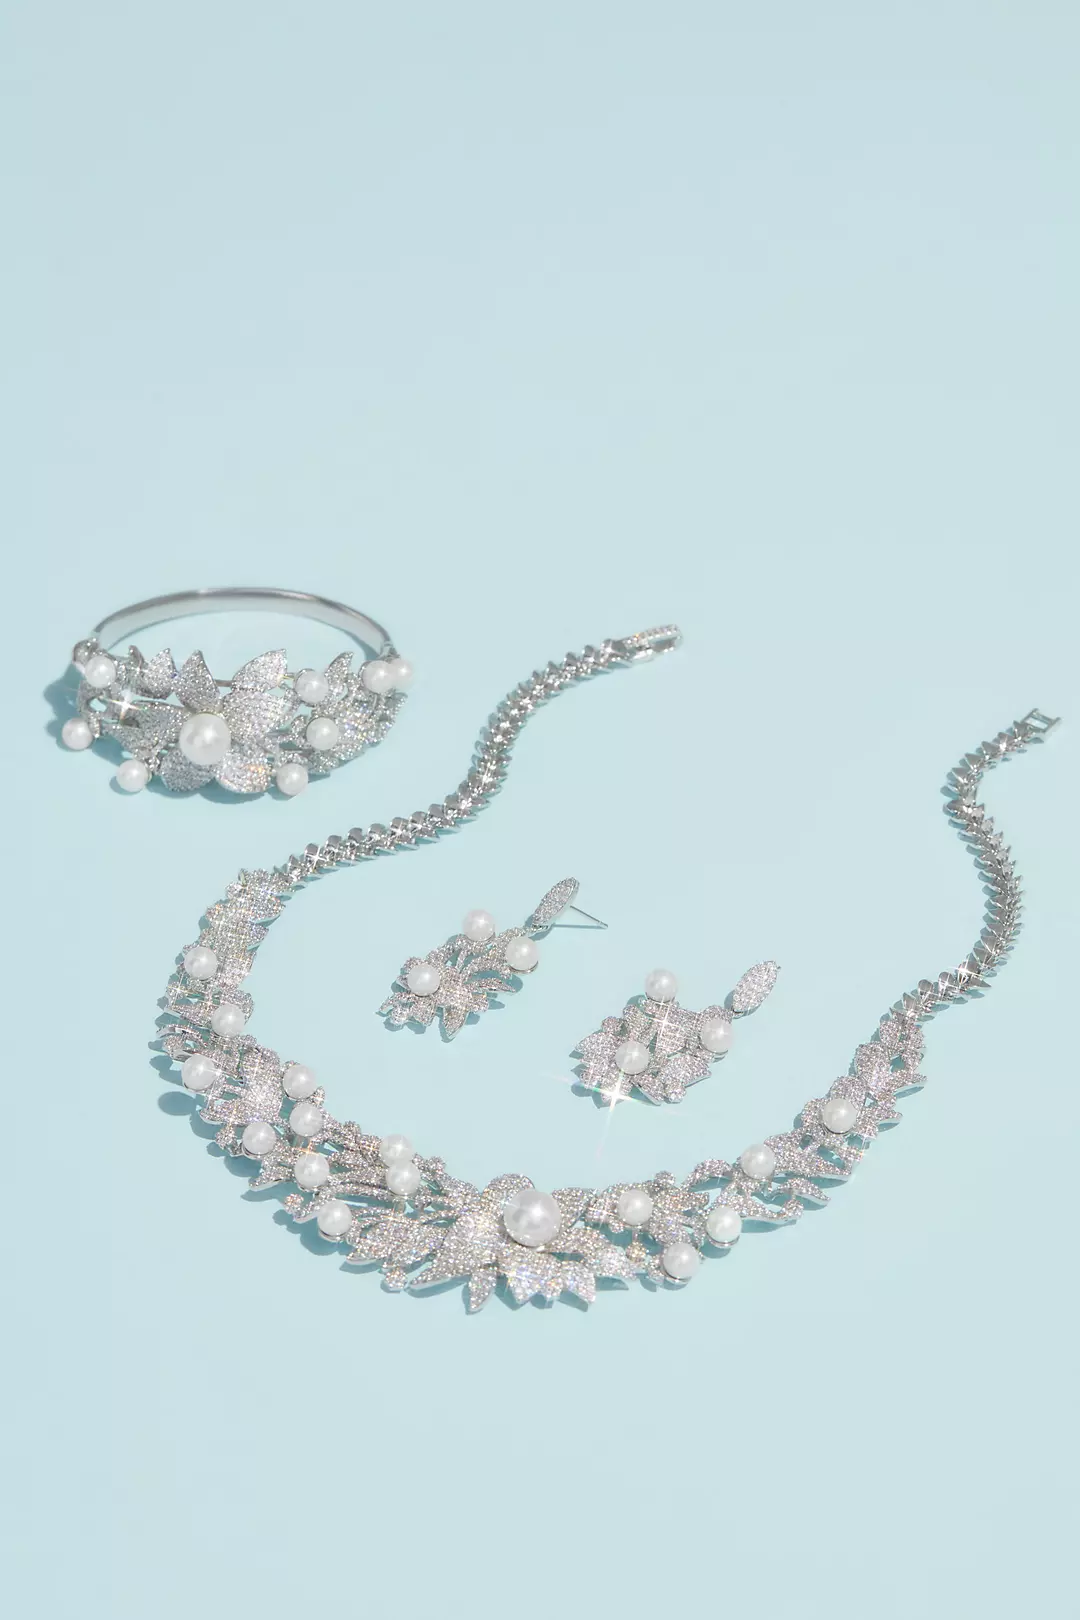 Crystal Floral Necklace with Pearl Embellishments Image 3